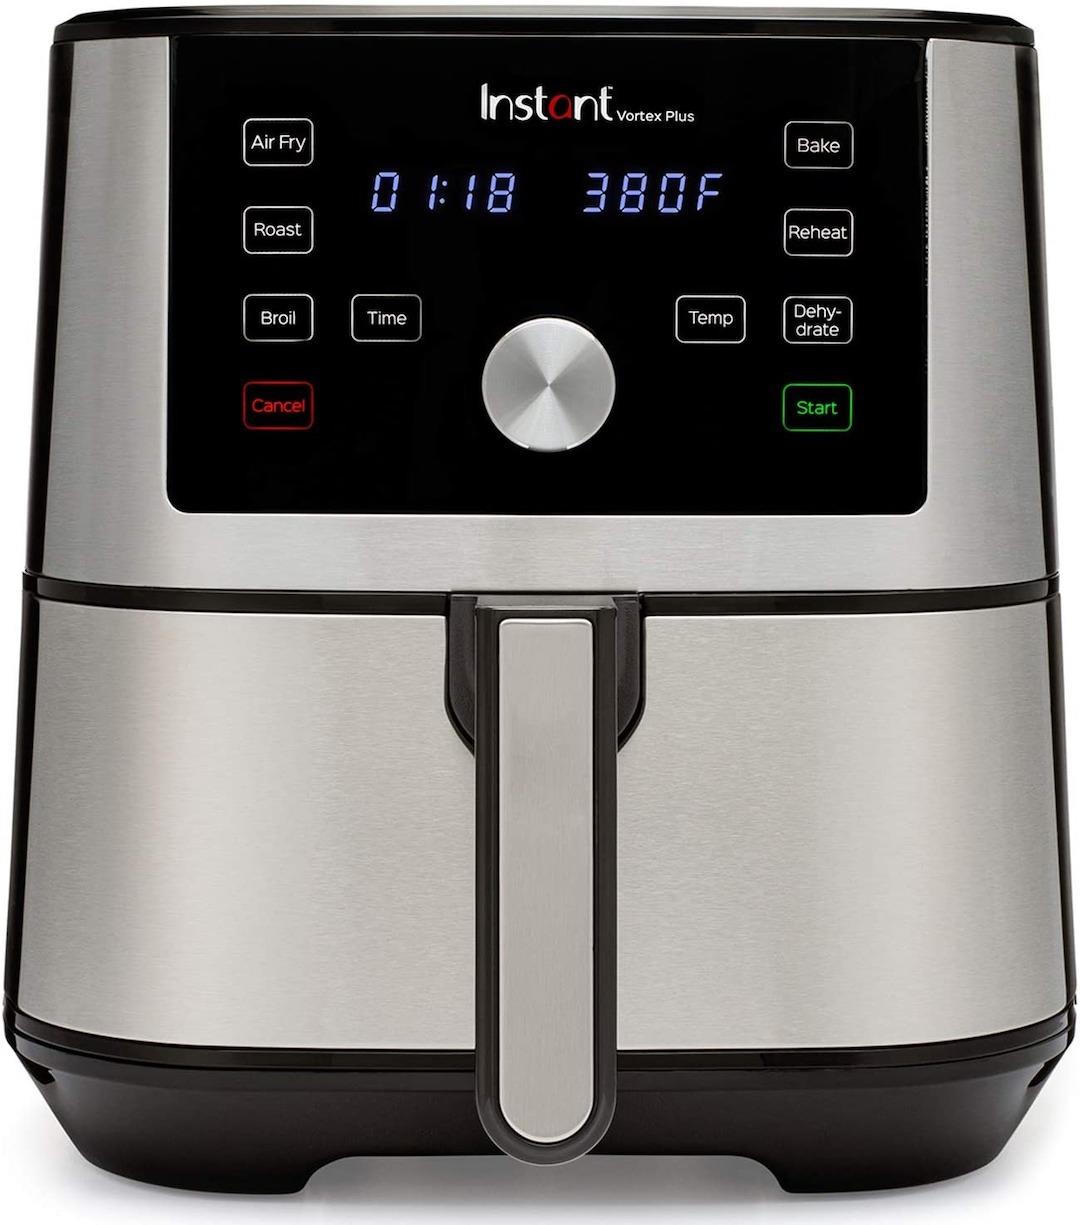 Instant Pot Vortex Plus 6-in-1 Air Fryer, 6 Quart, 6 One-Touch Programs, Air Fry, Roast, Broil, Bake, Reheat, and Dehydrate 